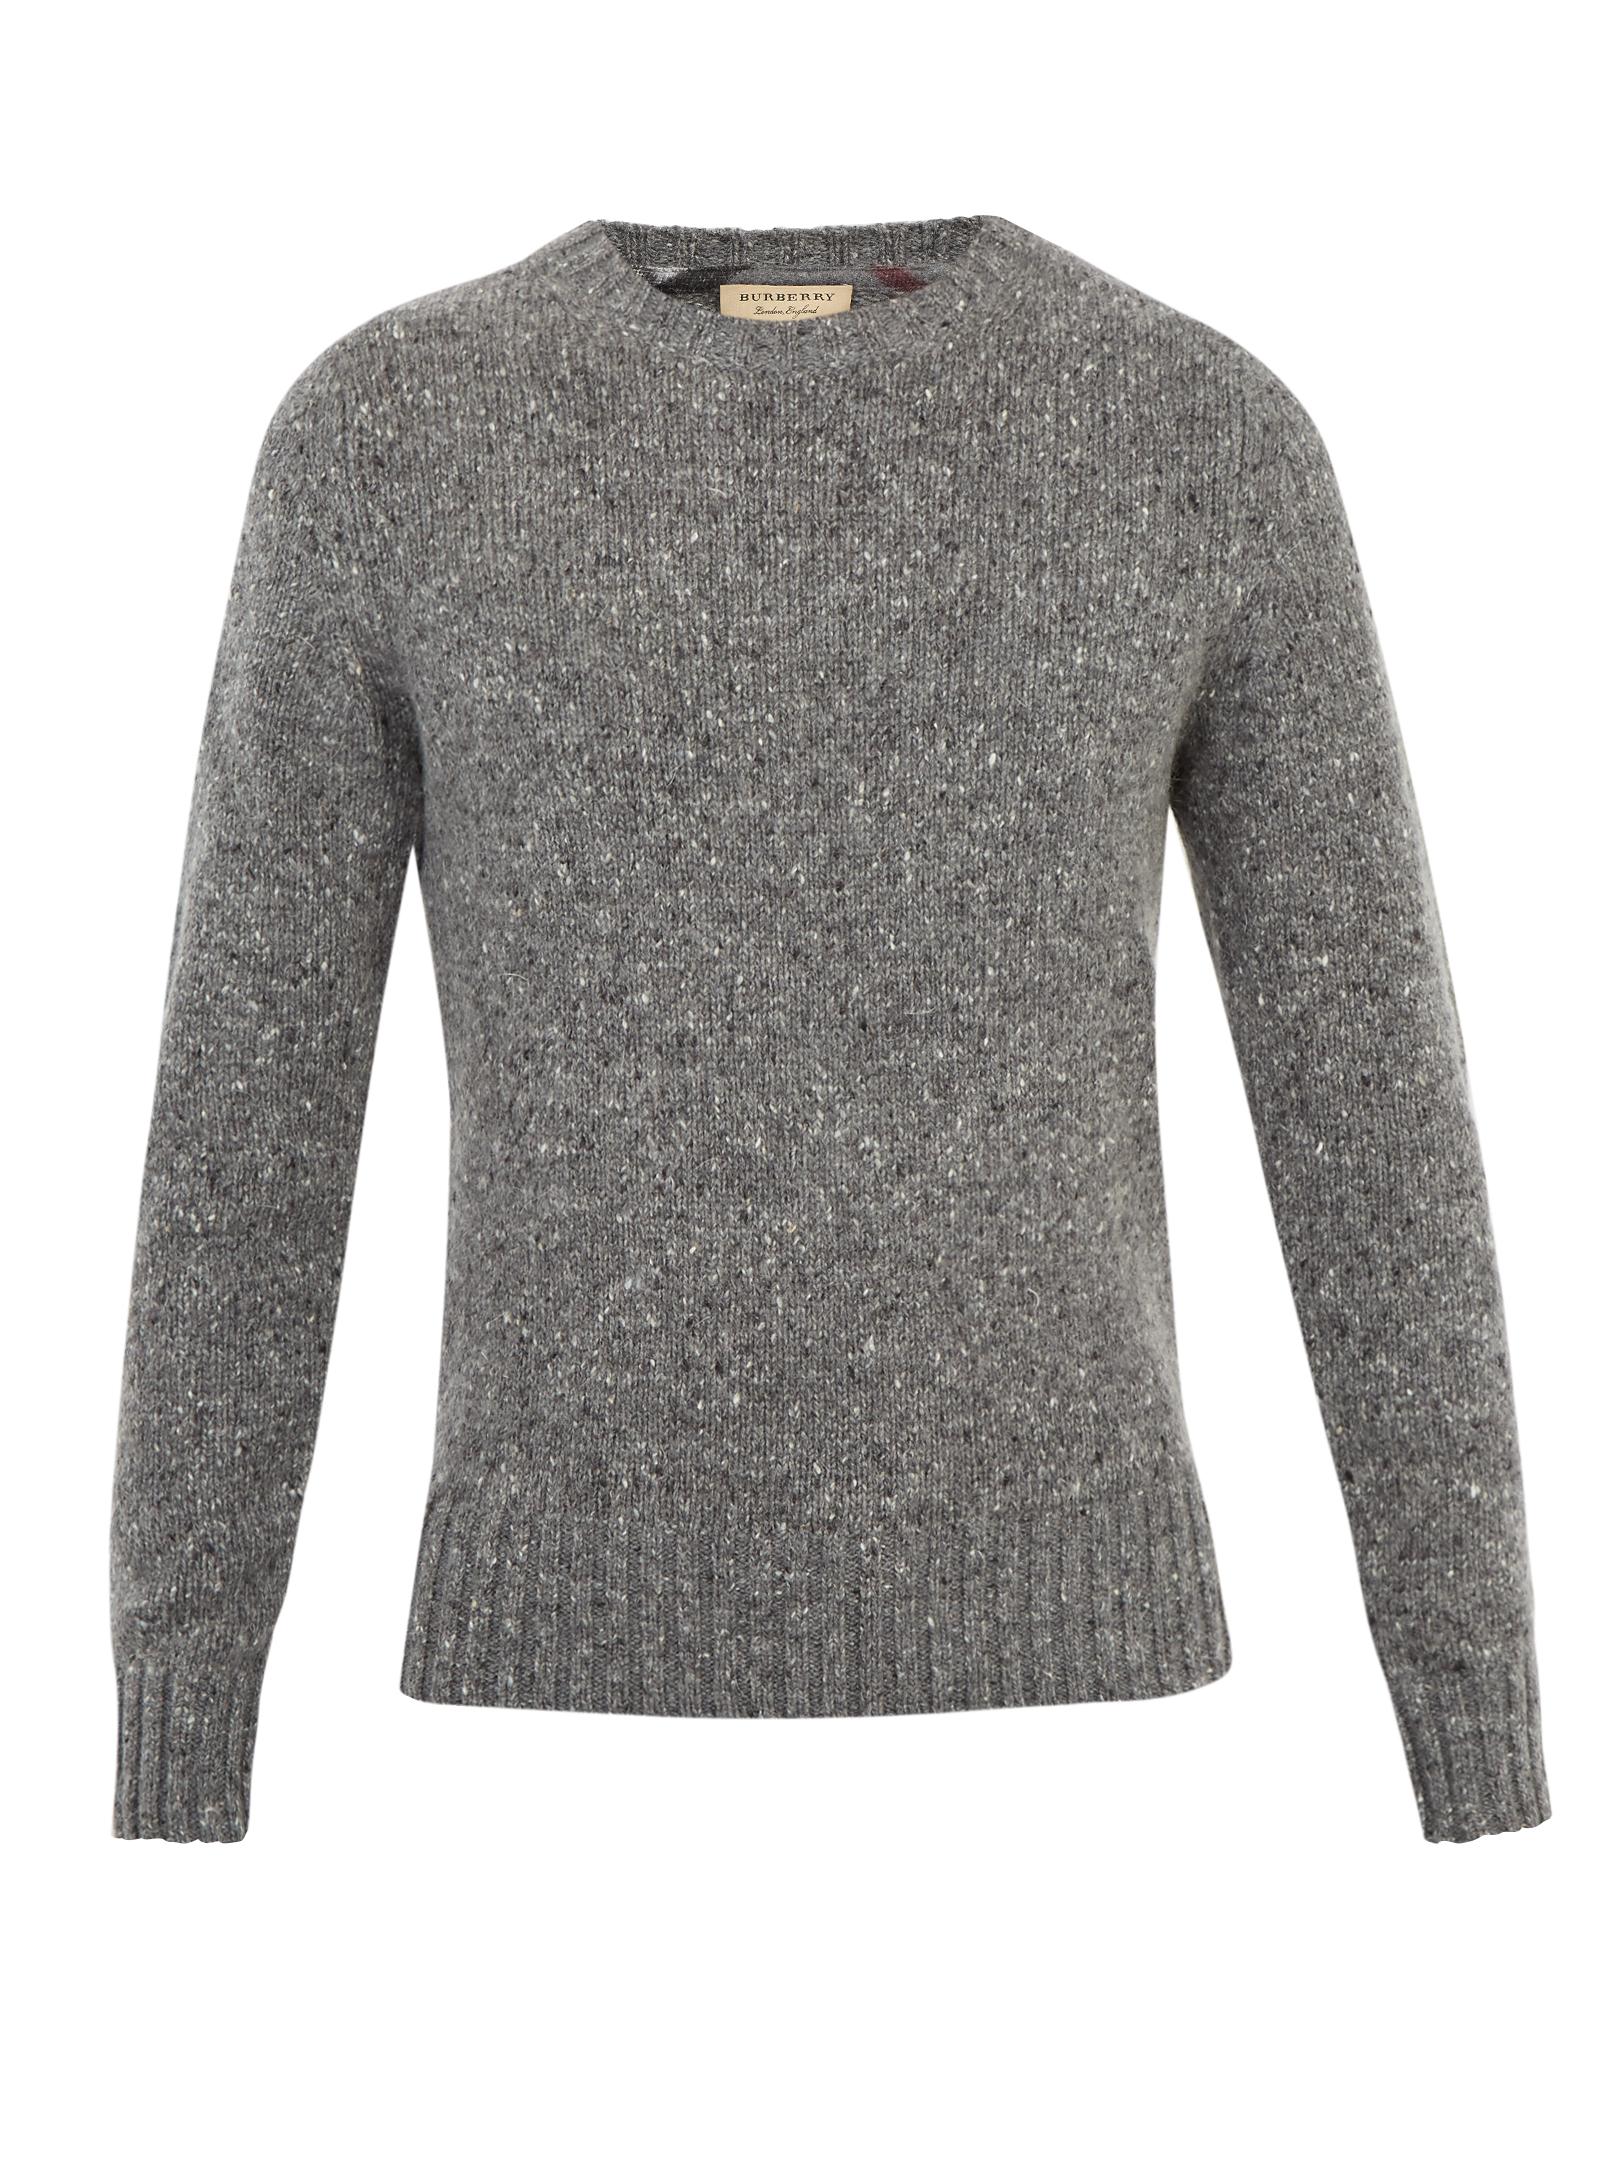 Lyst - Burberry Rossan Crew-neck Wool-blend Knit in Gray for Men